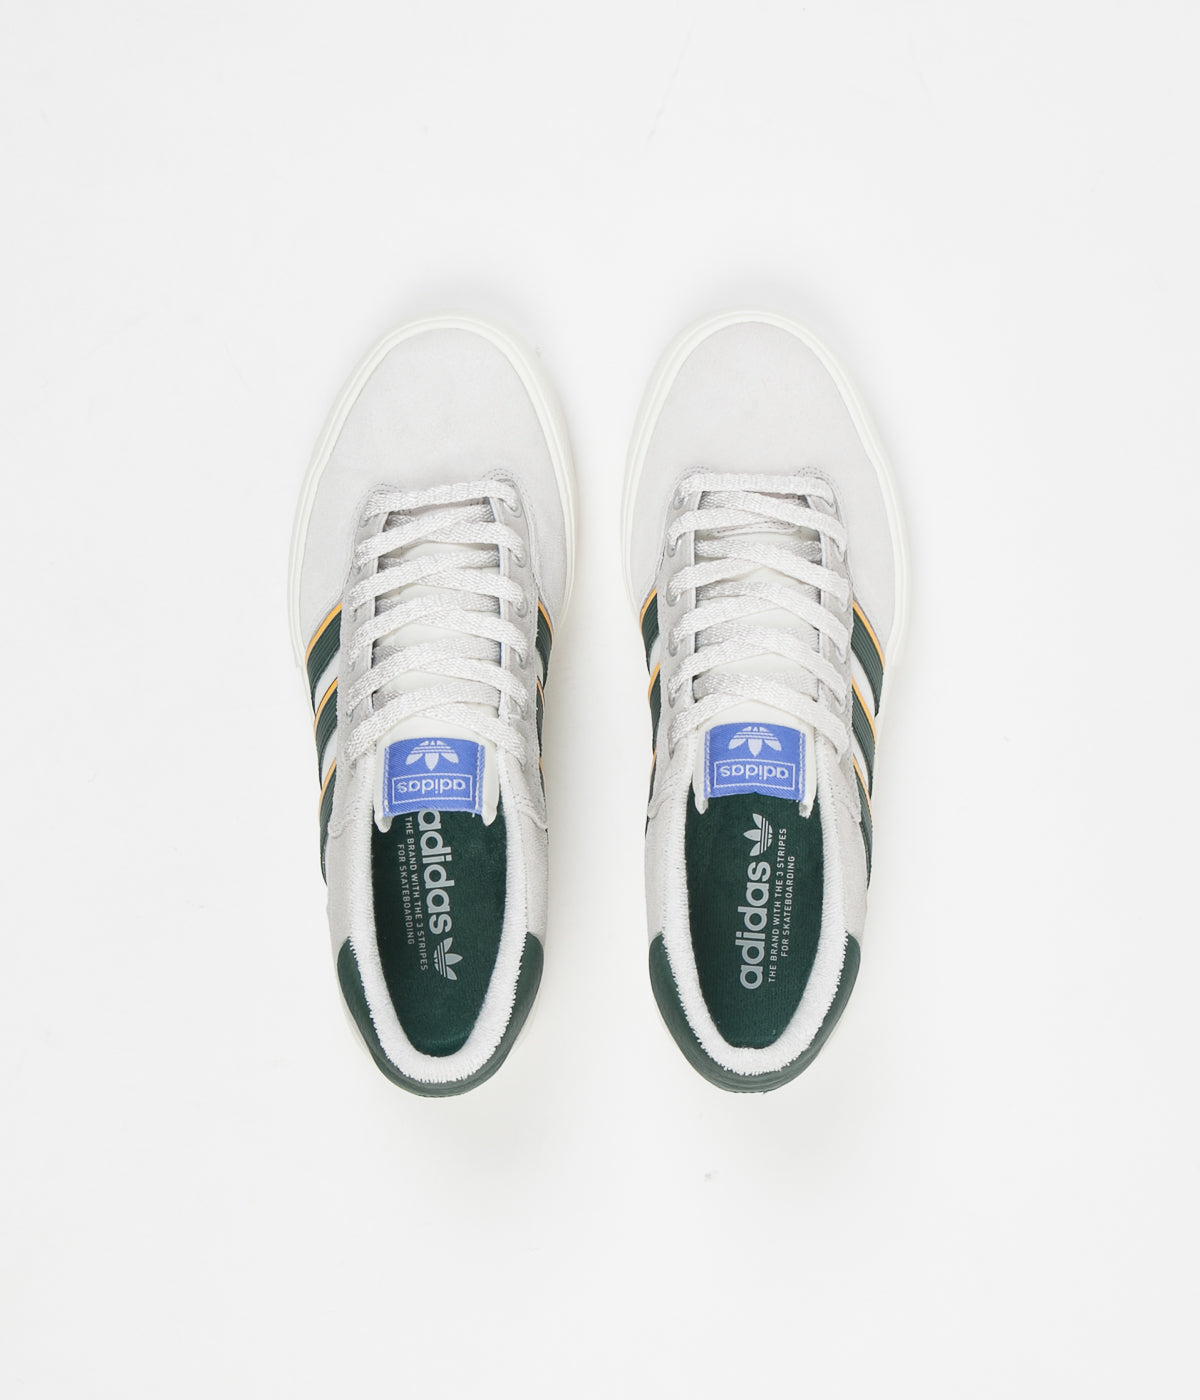 adidas sneakers green stripes